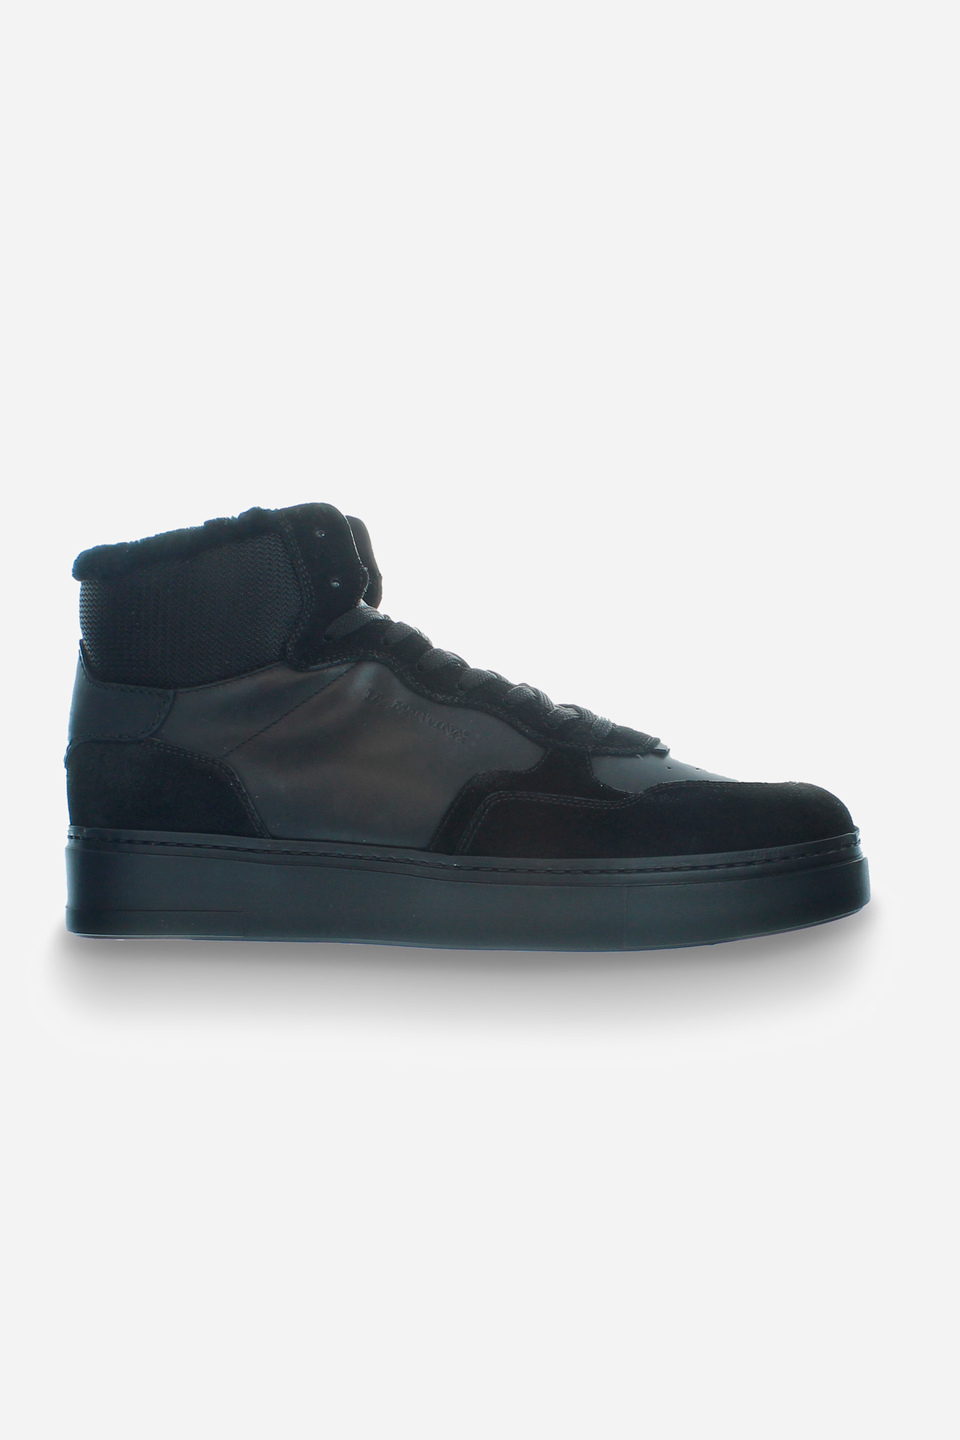 Men leather sneakers mixed suede with sheepskin lining | La Martina - Official Online Shop